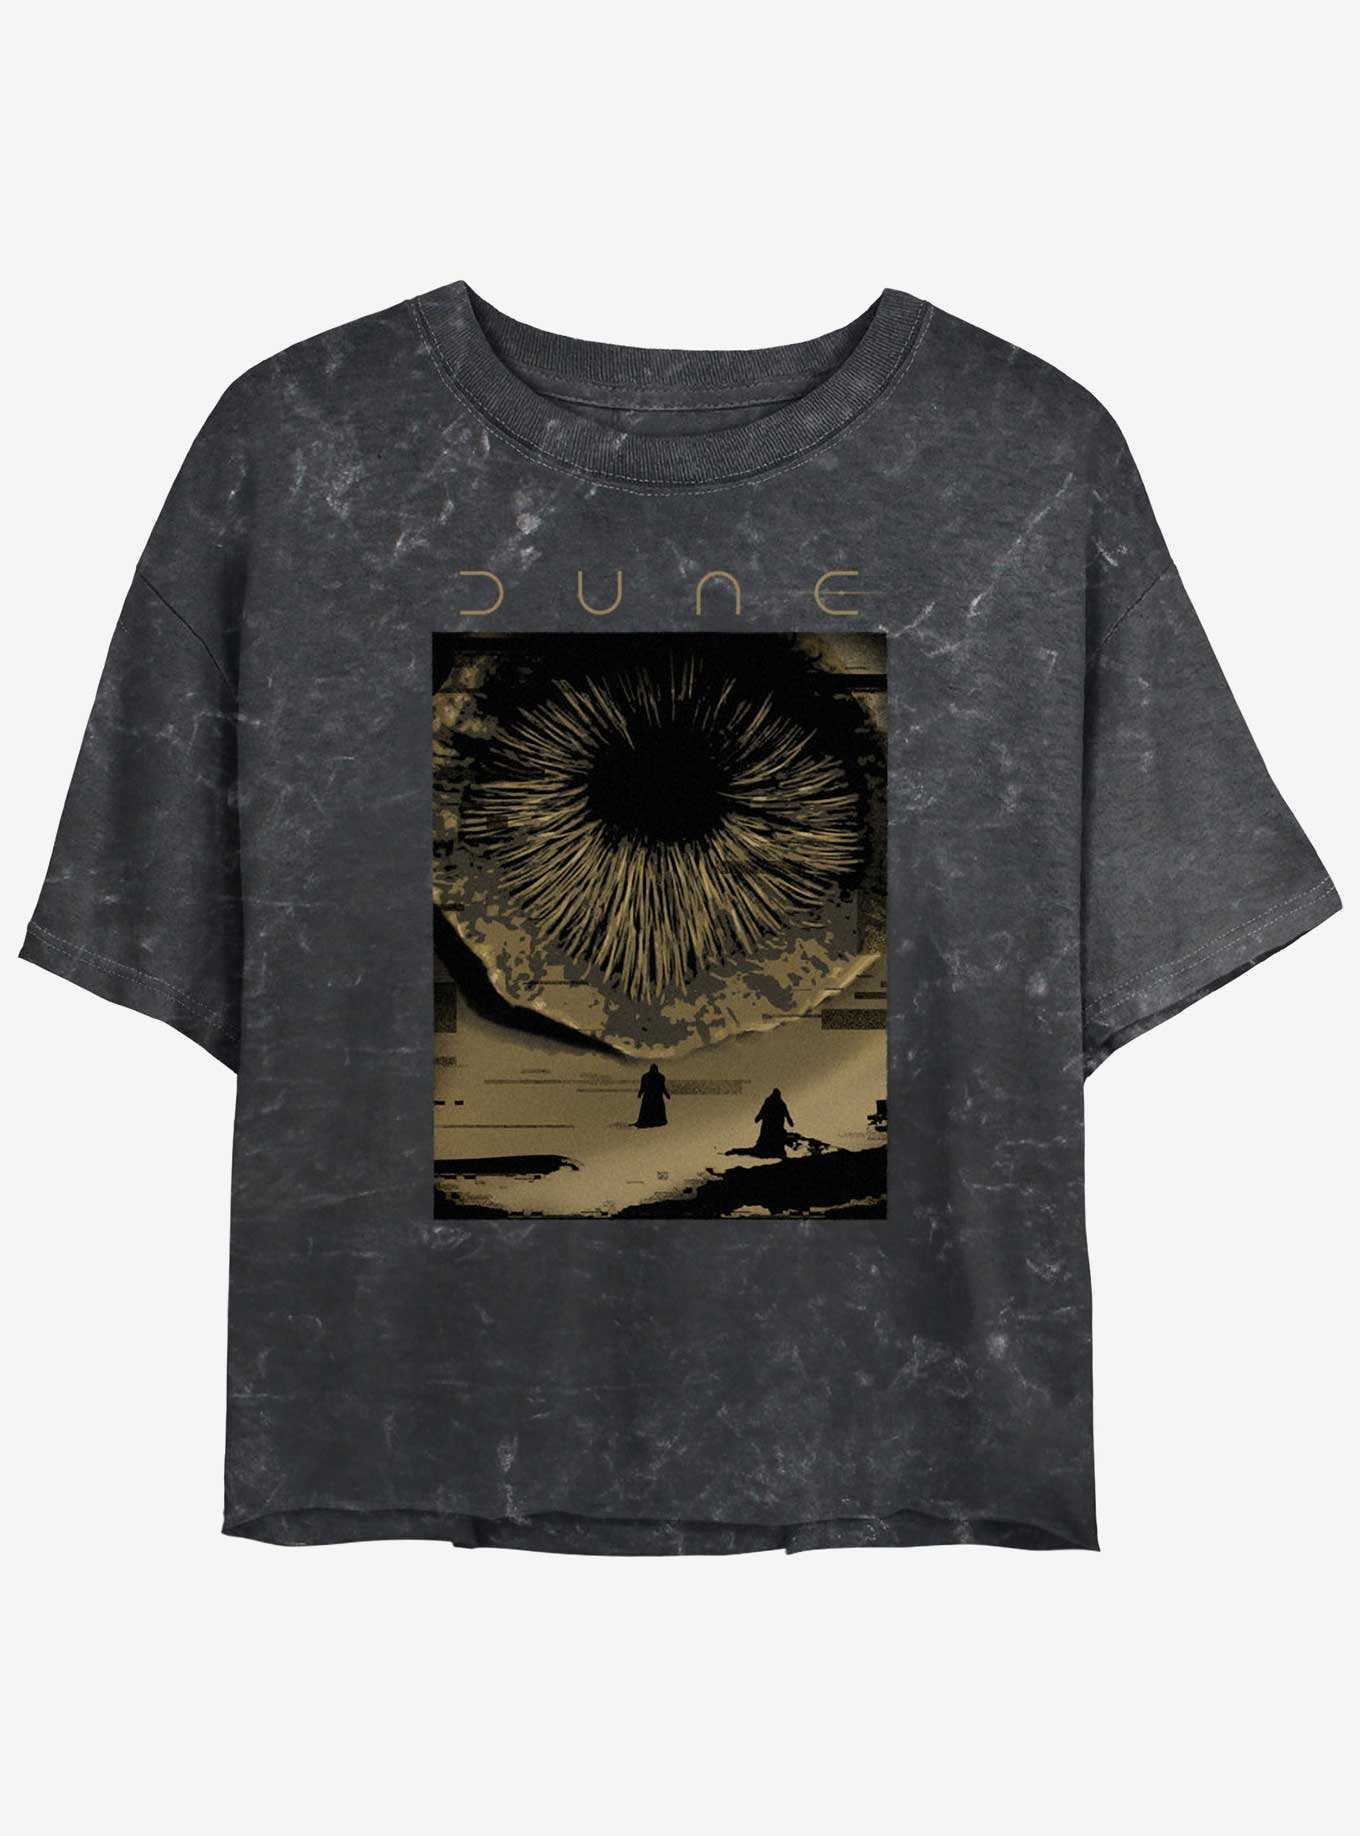 Dune: Part Two Shai-Hulud Poster Mineral Wash Girls Crop T-Shirt, , hi-res